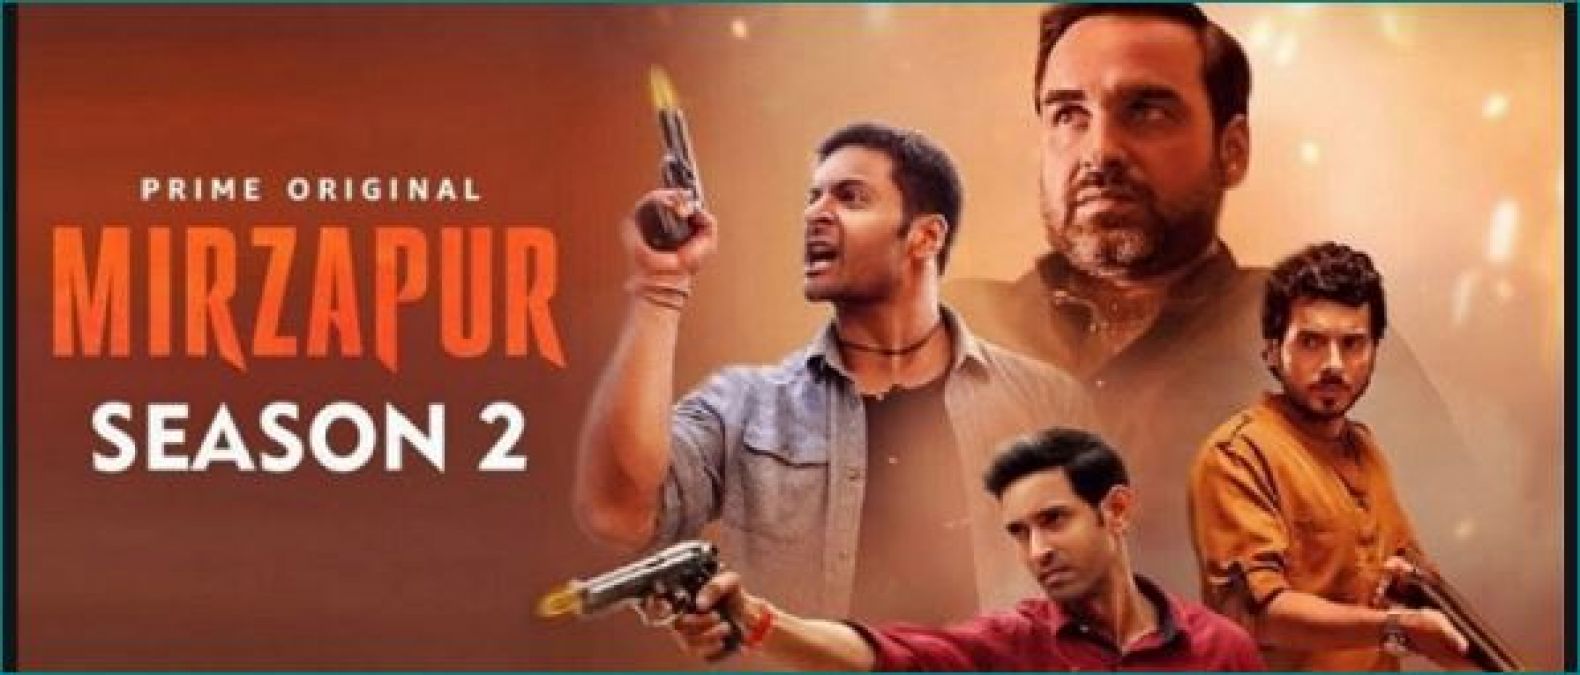 'Mirzapur 2' will be released soon, read details